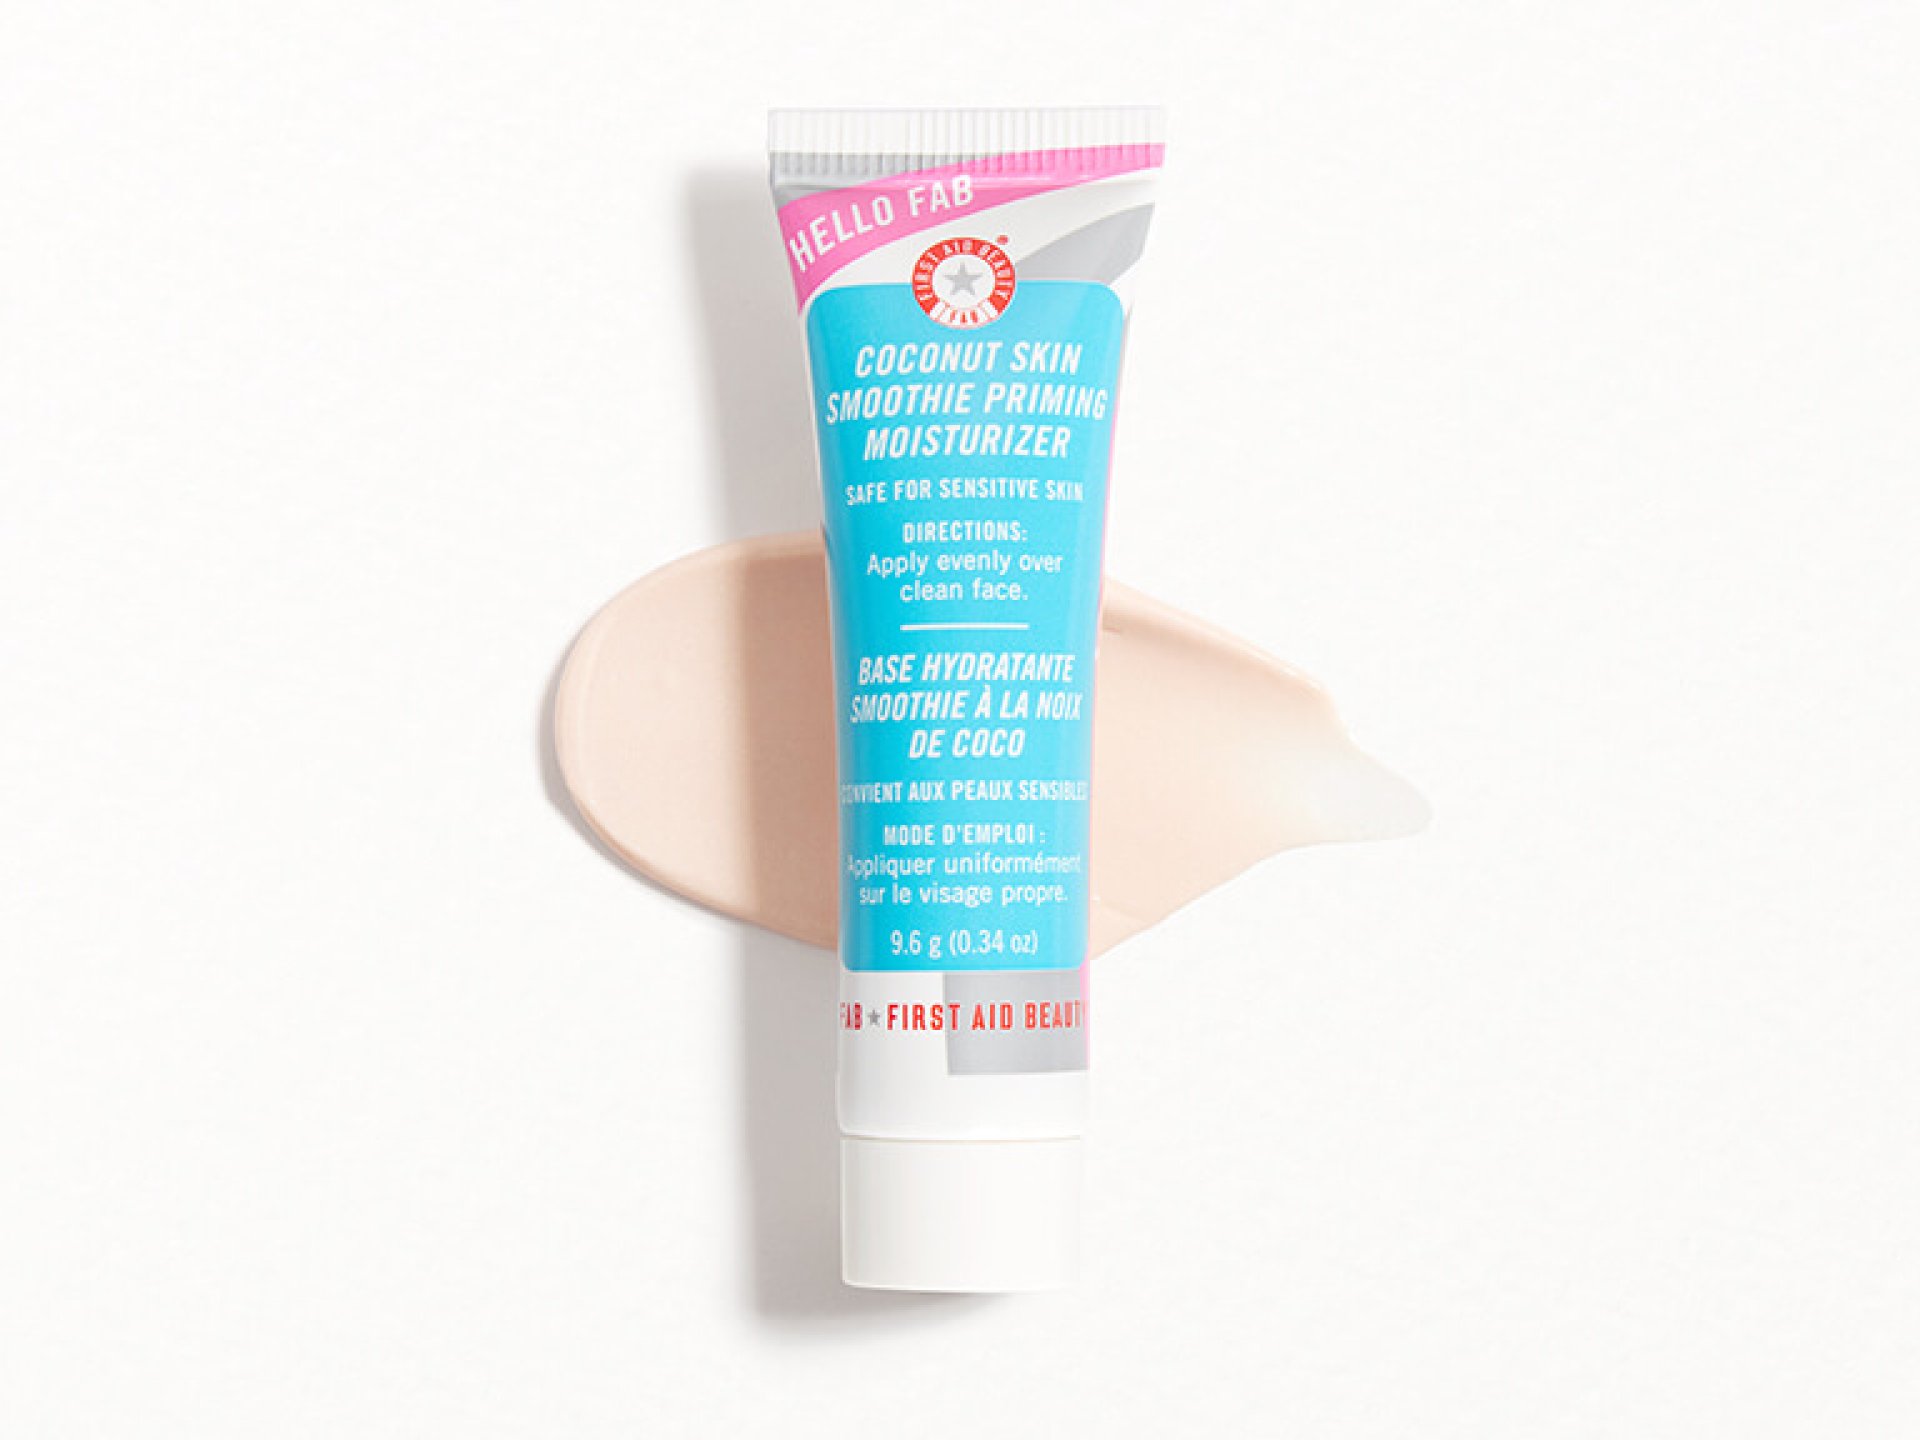 FIRST AID BEAUTY Hello FAB Coconut Skin Smoothie Priming Moisturizer